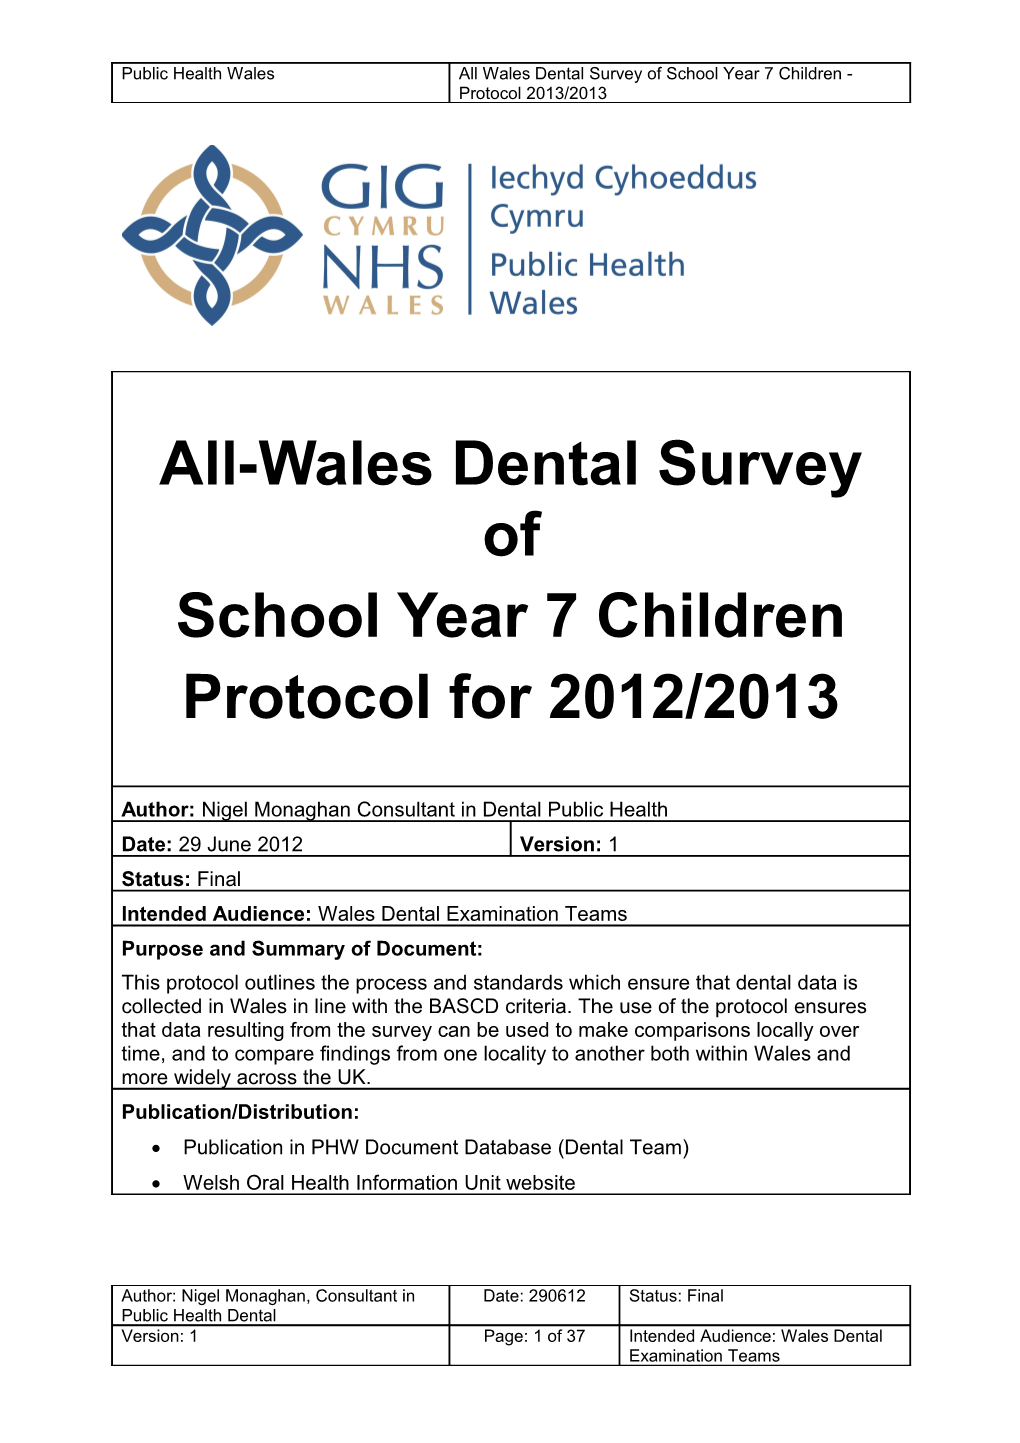 Epidemiological Survey of 12-Year-Old Children Wales 2012/2013